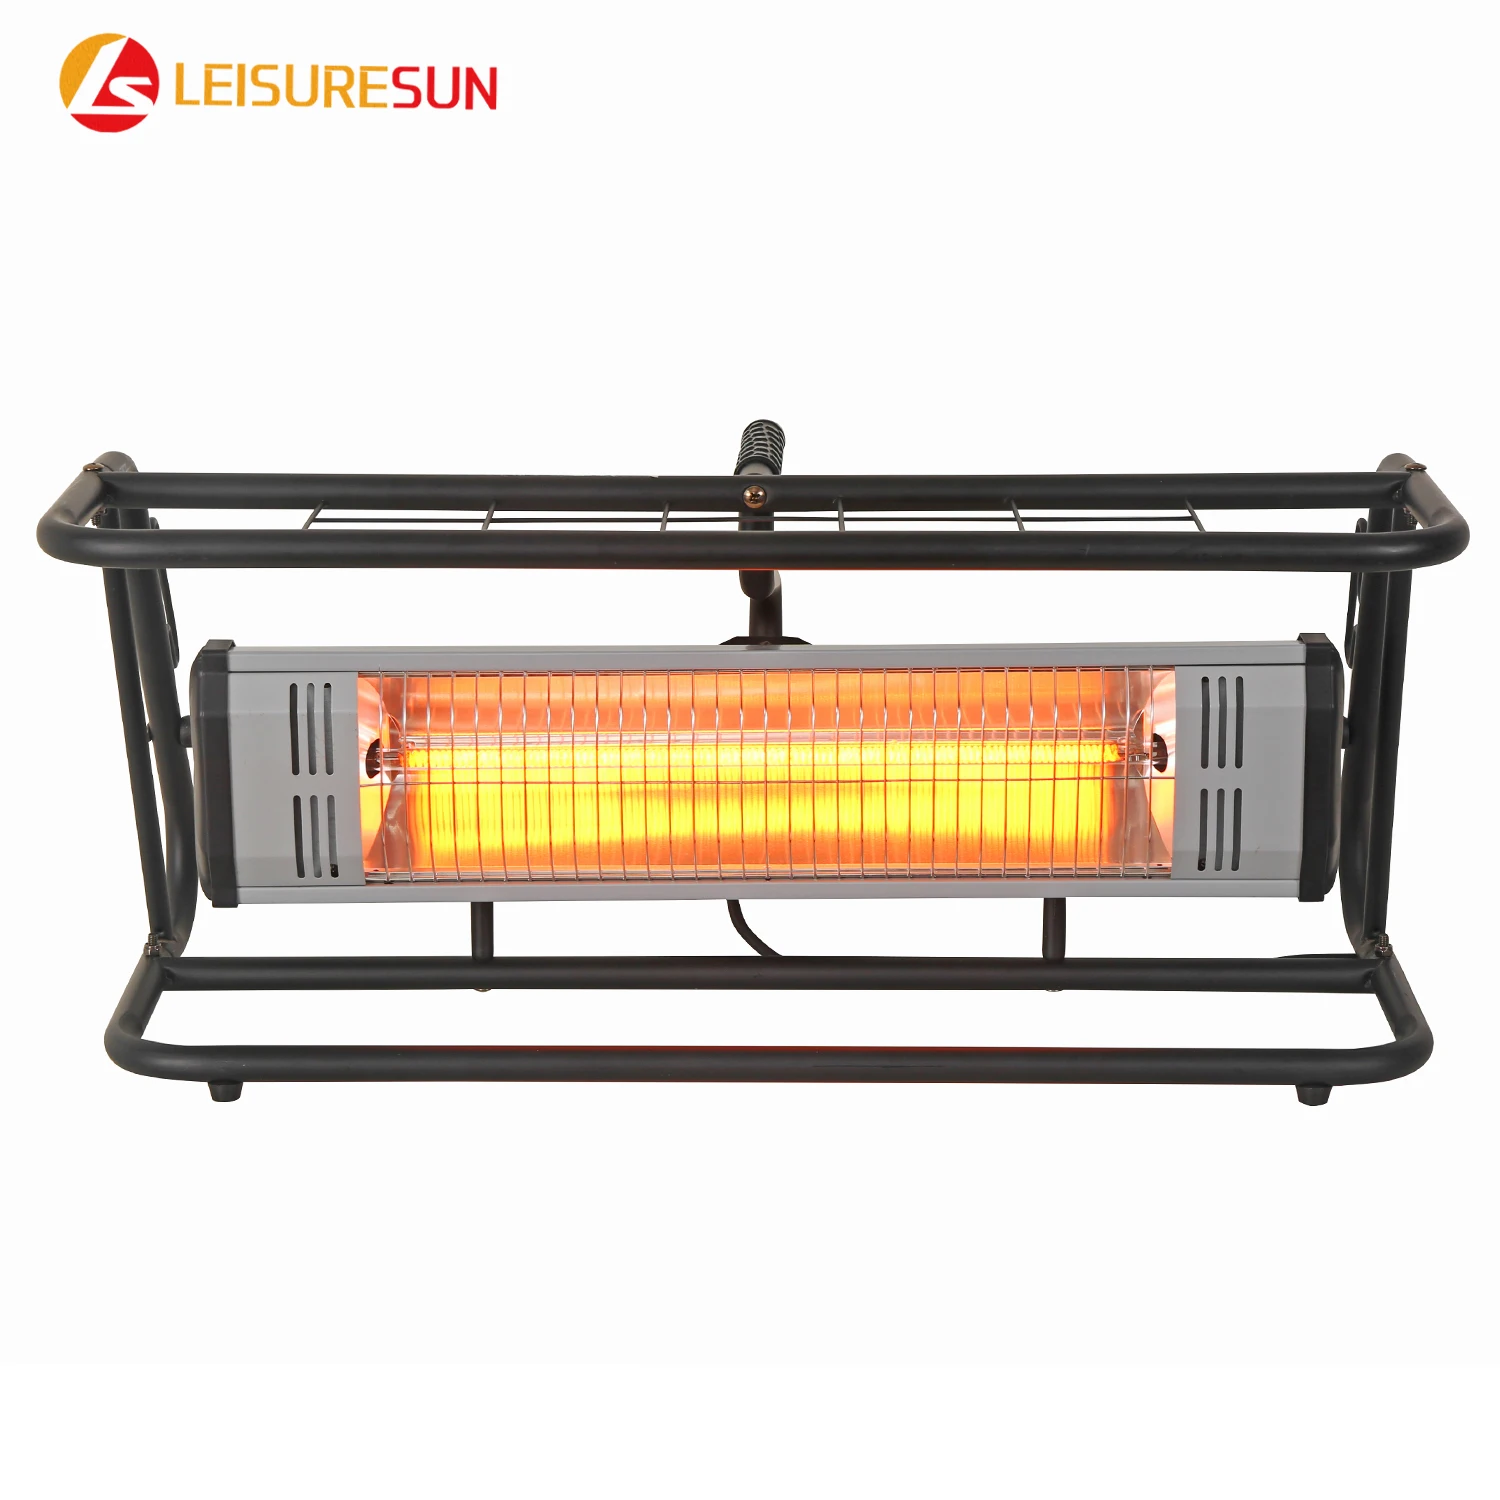 1500W Workspace Radiant infrared heater with portable roll cage